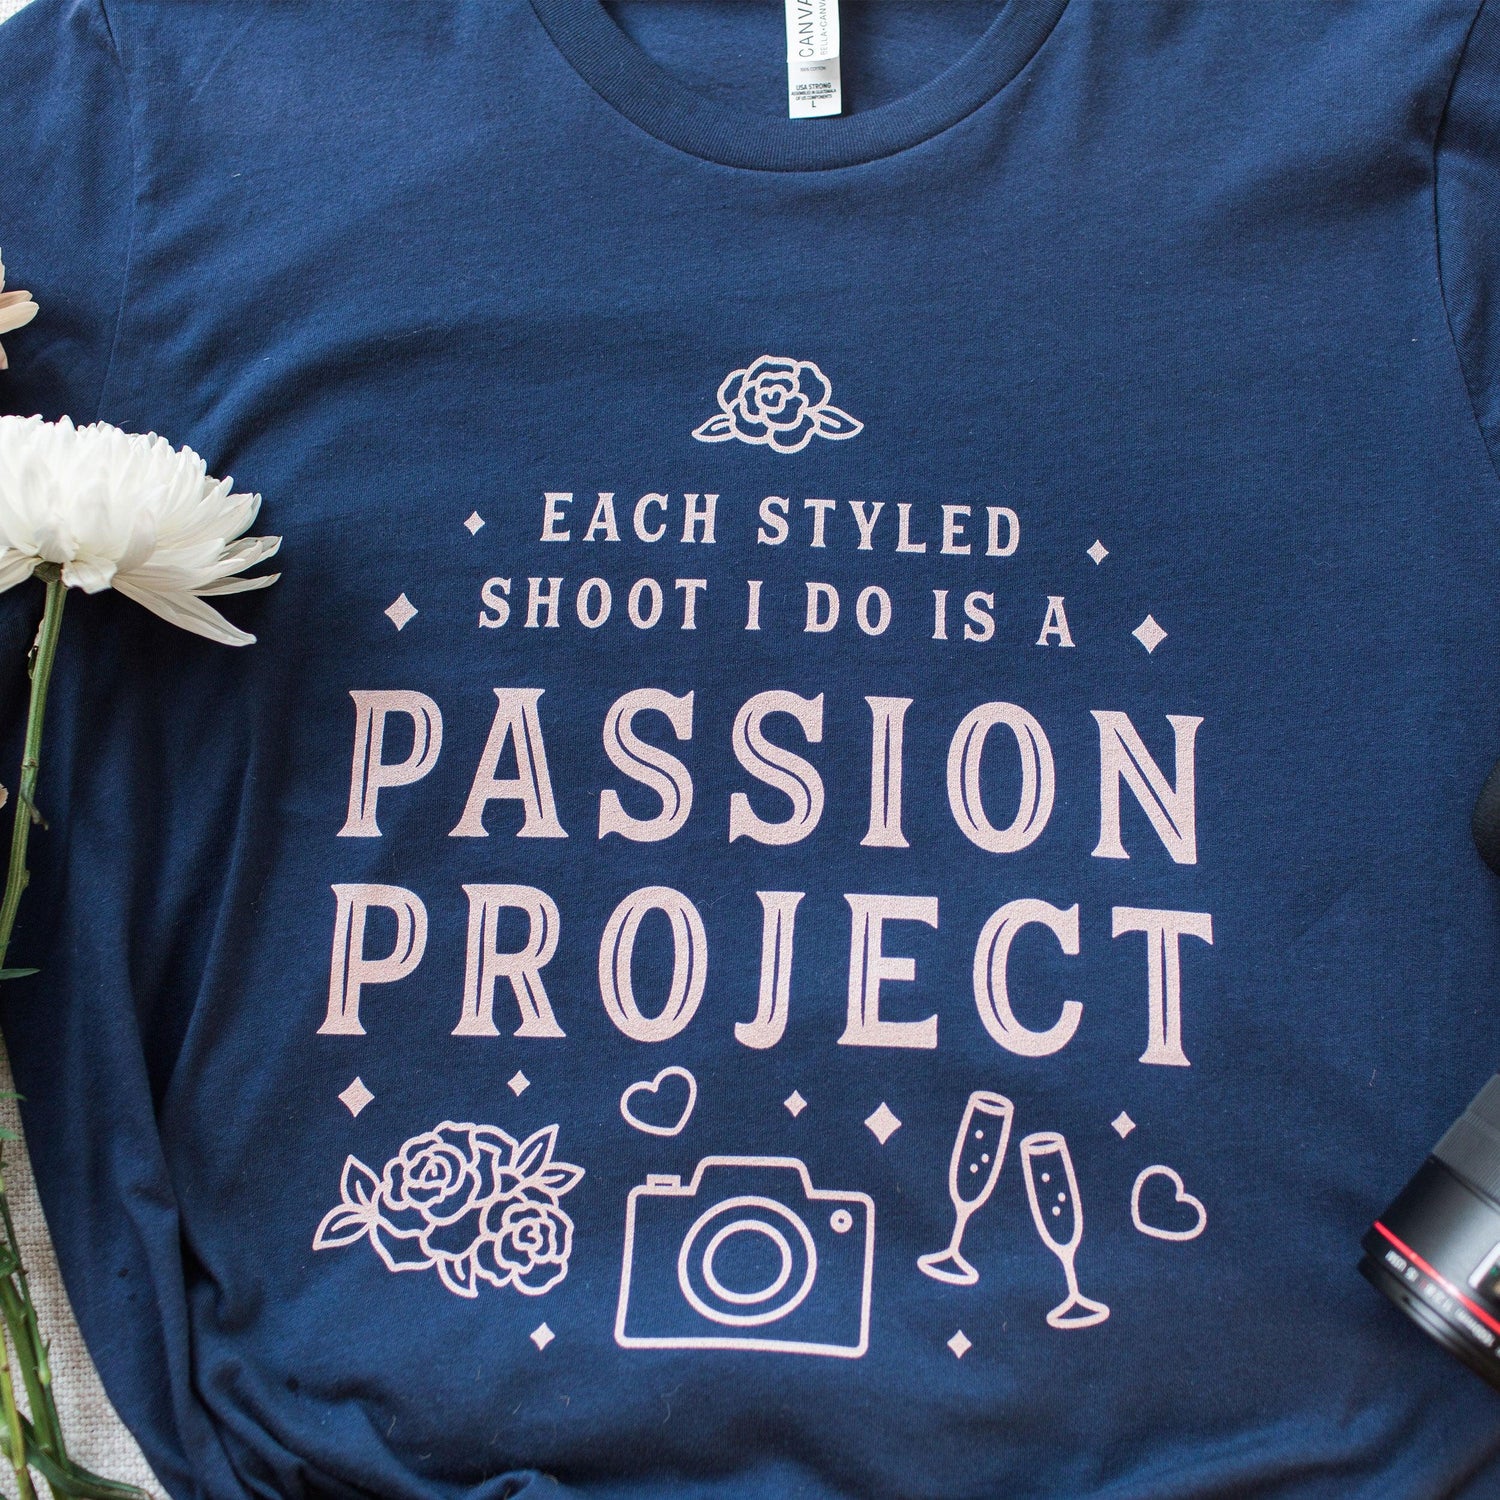 Each Styled Shoot I do is a Passion Project - Wedding Photographer Short-Sleeve Tee - Plus Sizes Available! by Oaklynn Lane